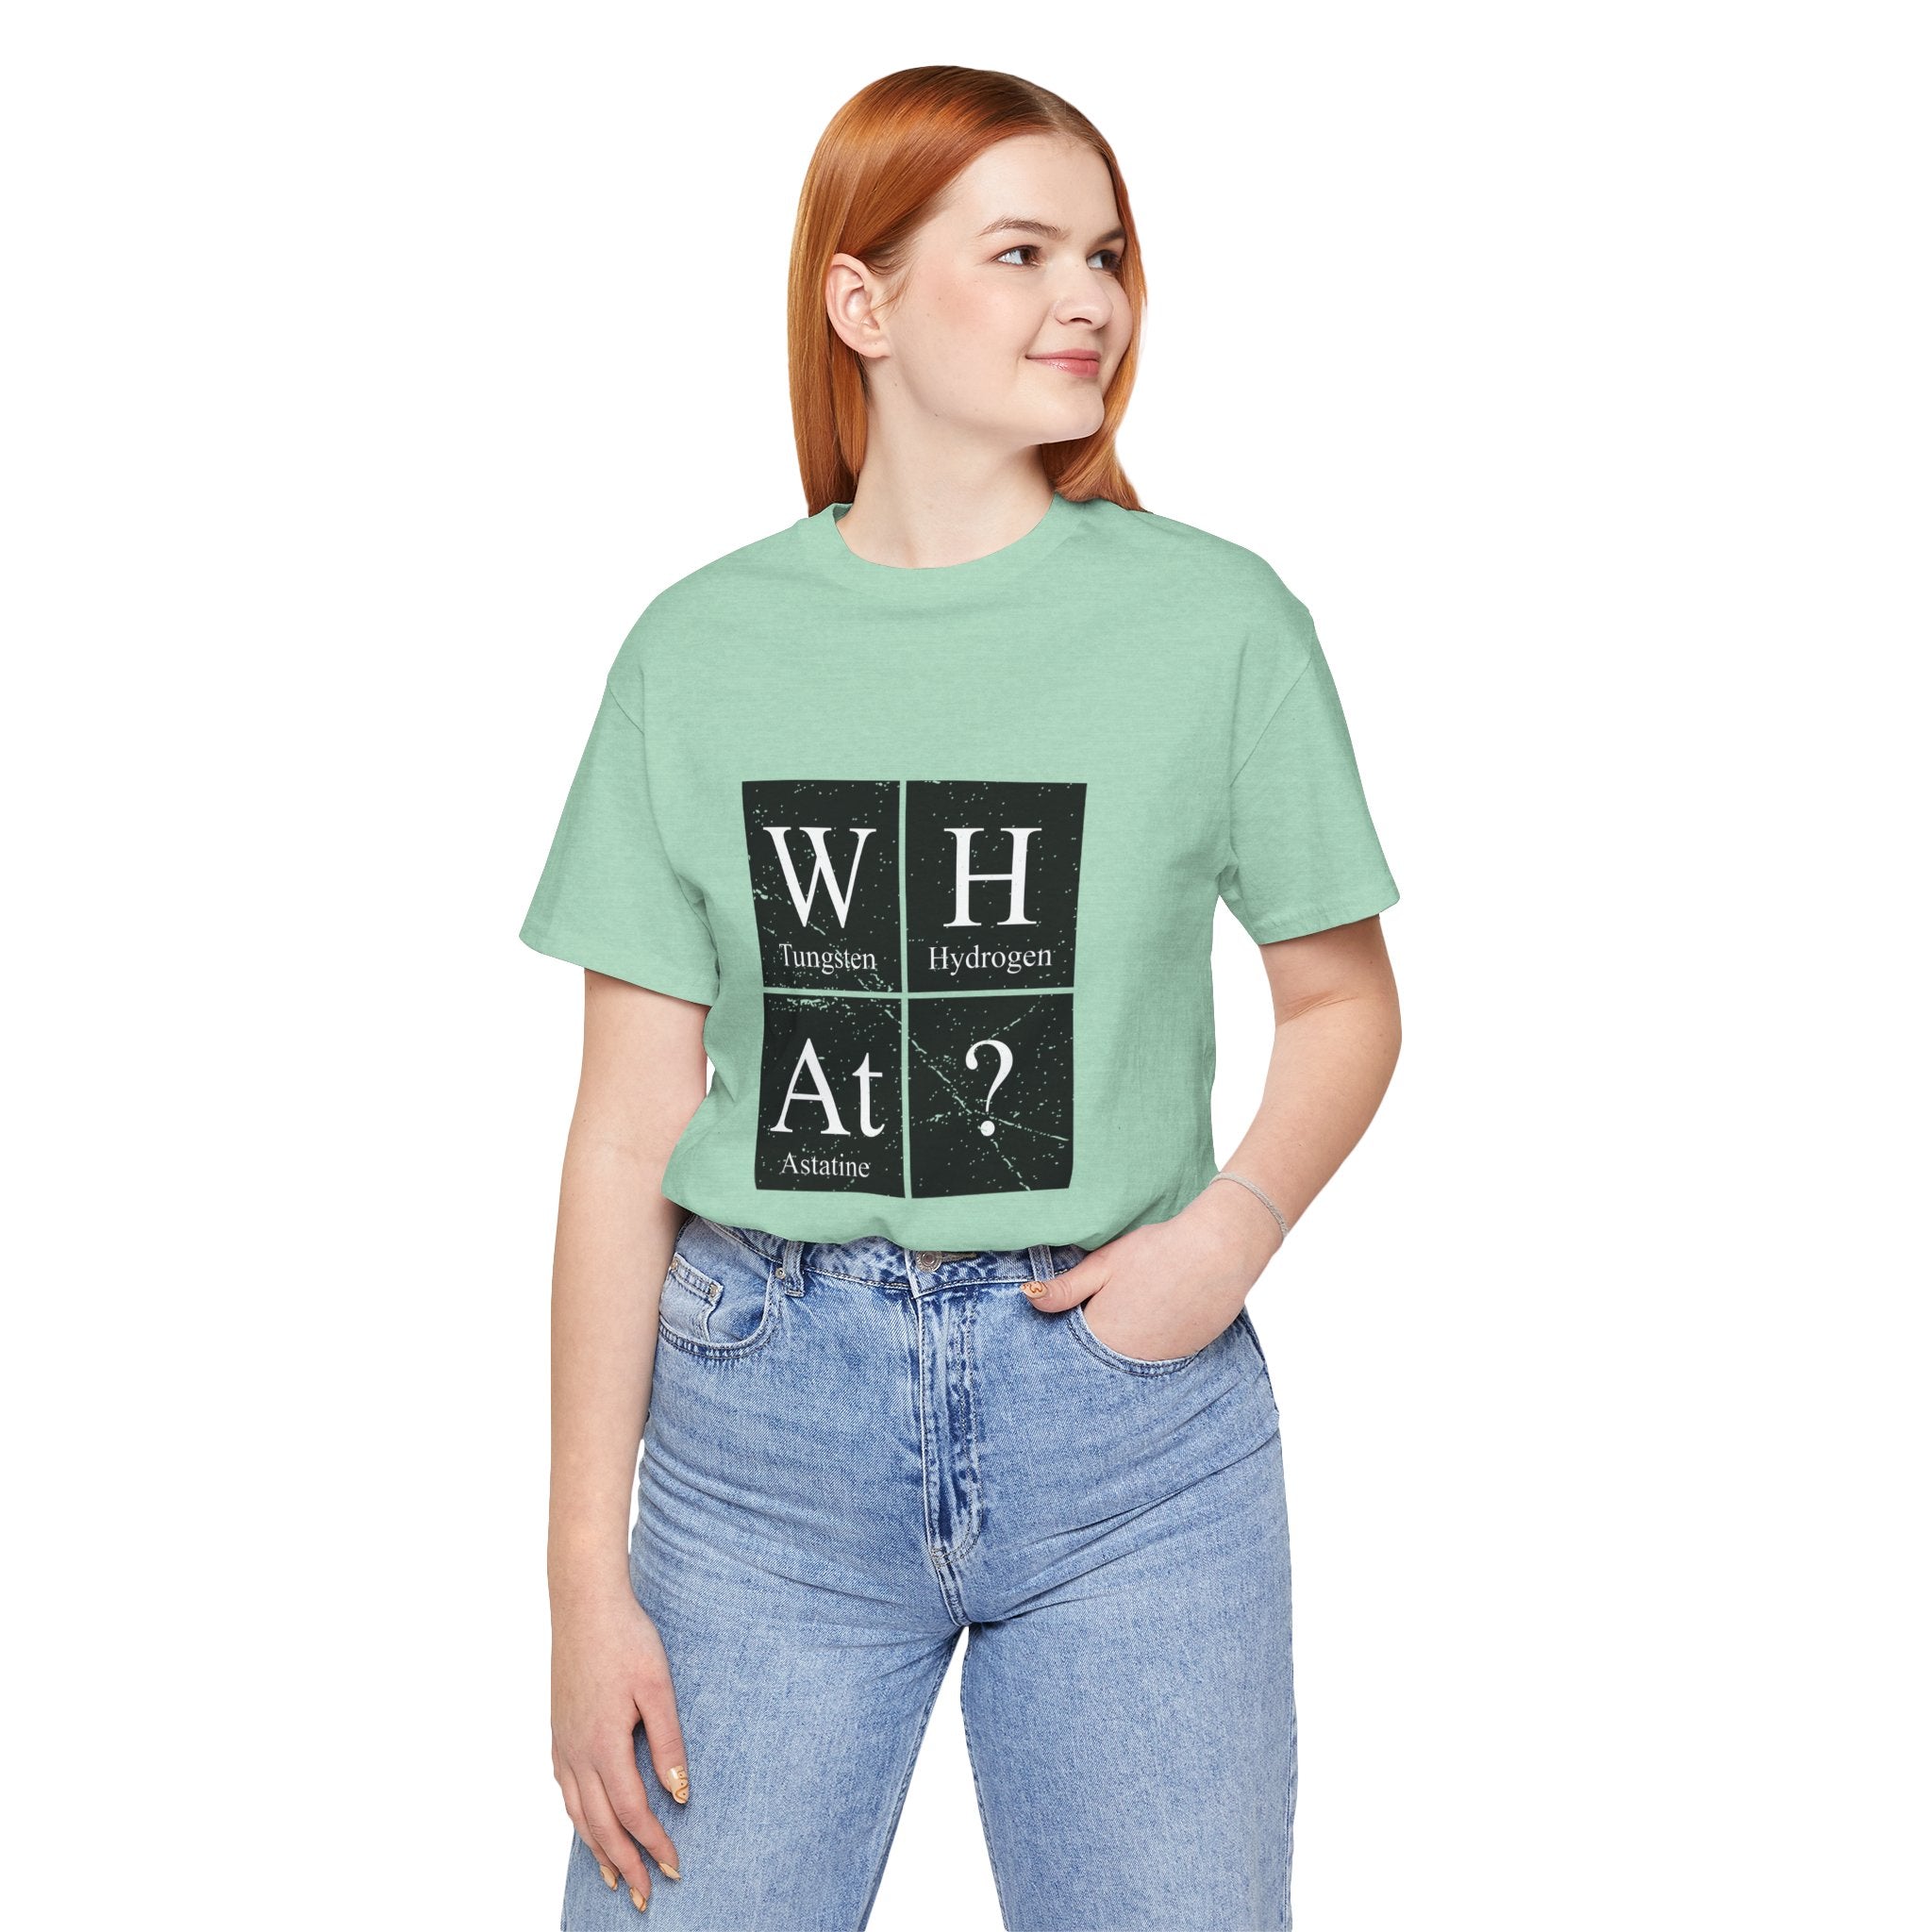 Woman in a green unisex jersey tee with W-H-At-? design, standing with hands in jeans pockets.